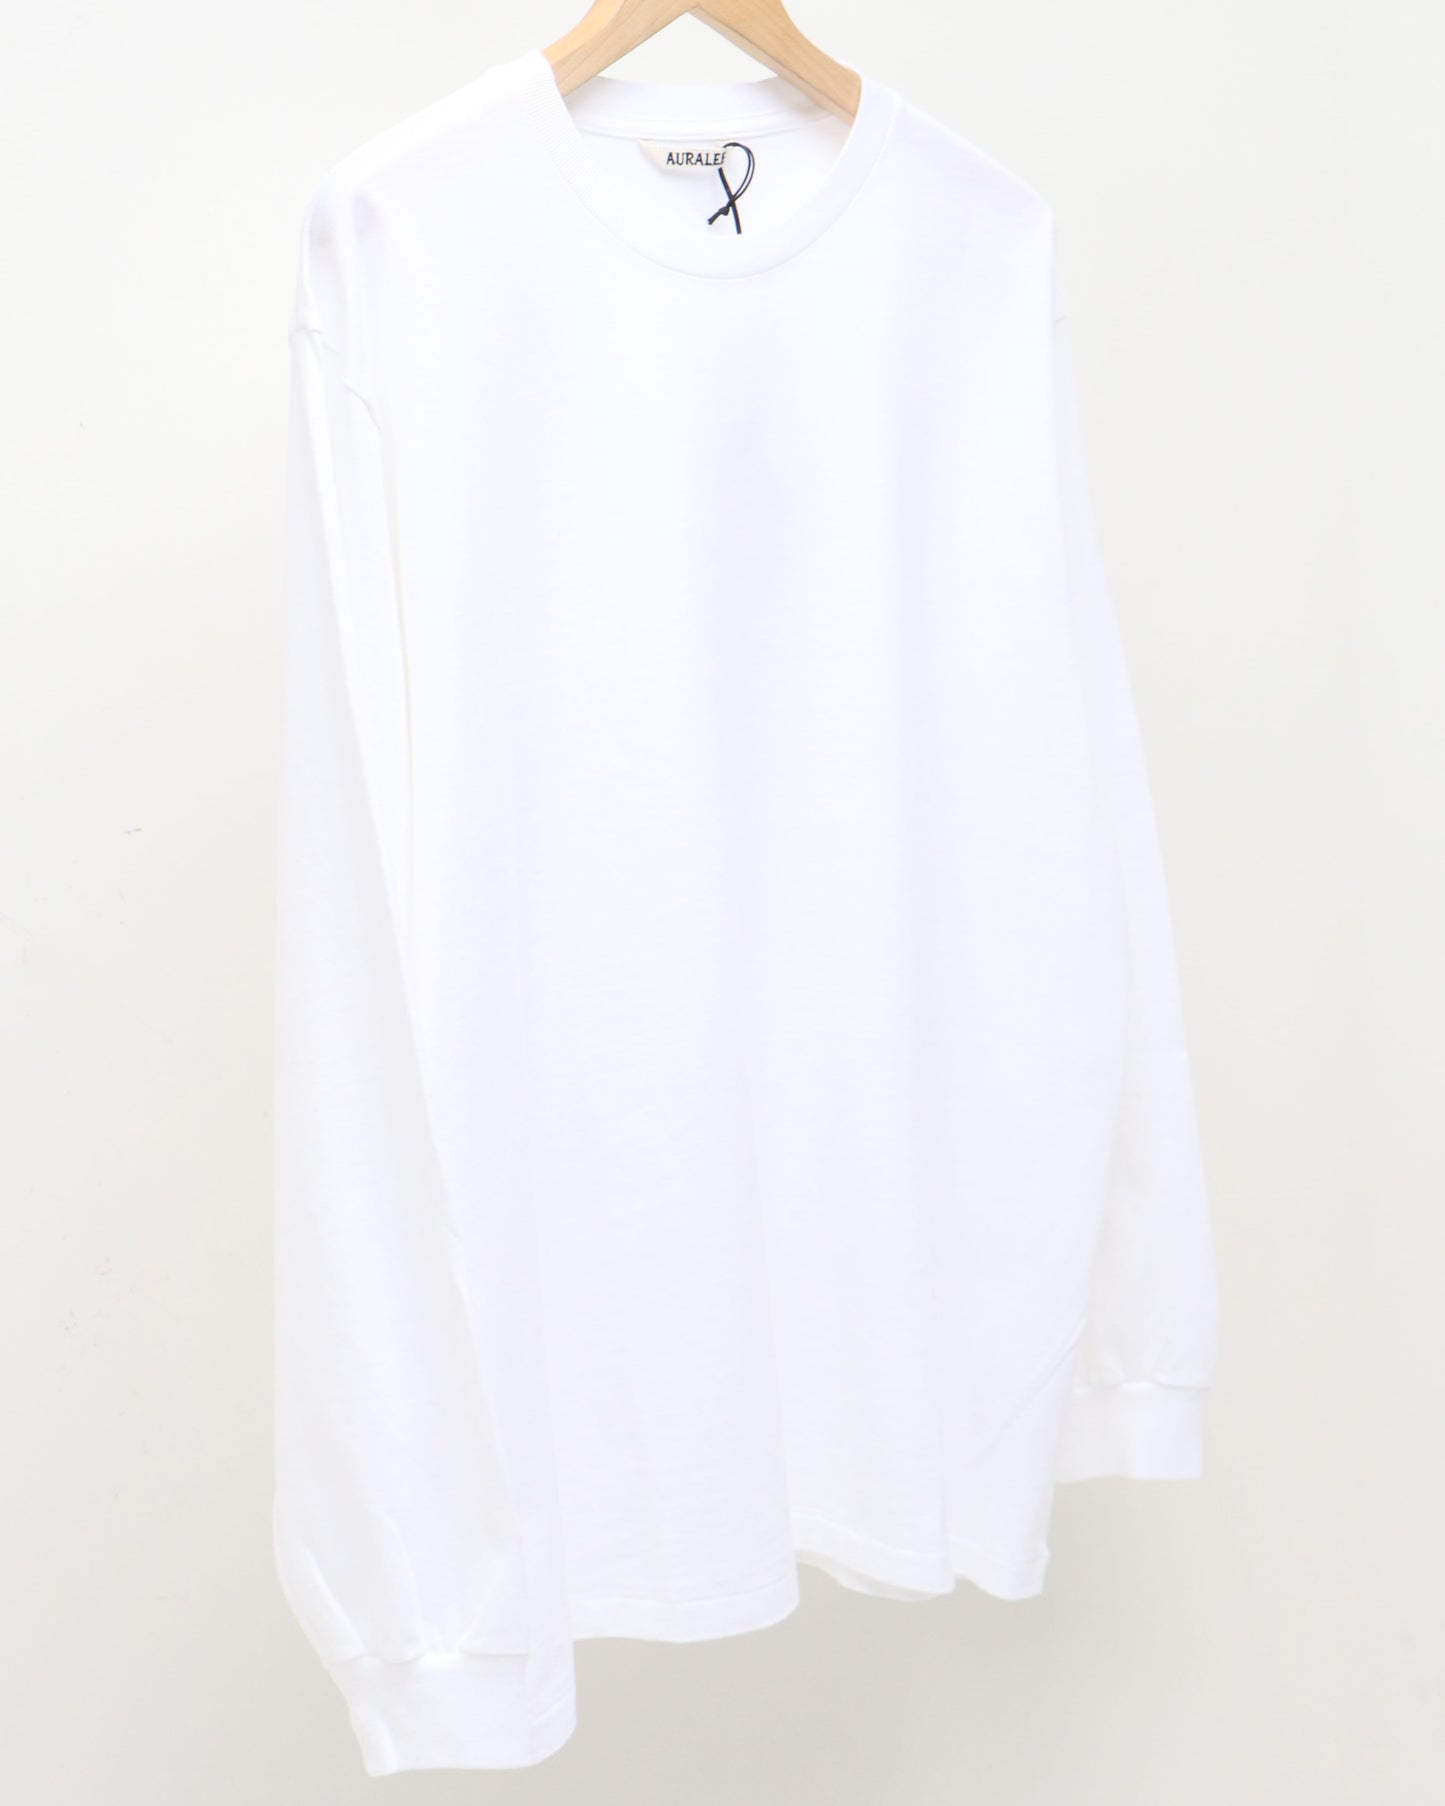 LUSTER PLAITING L/S TEE WHITE